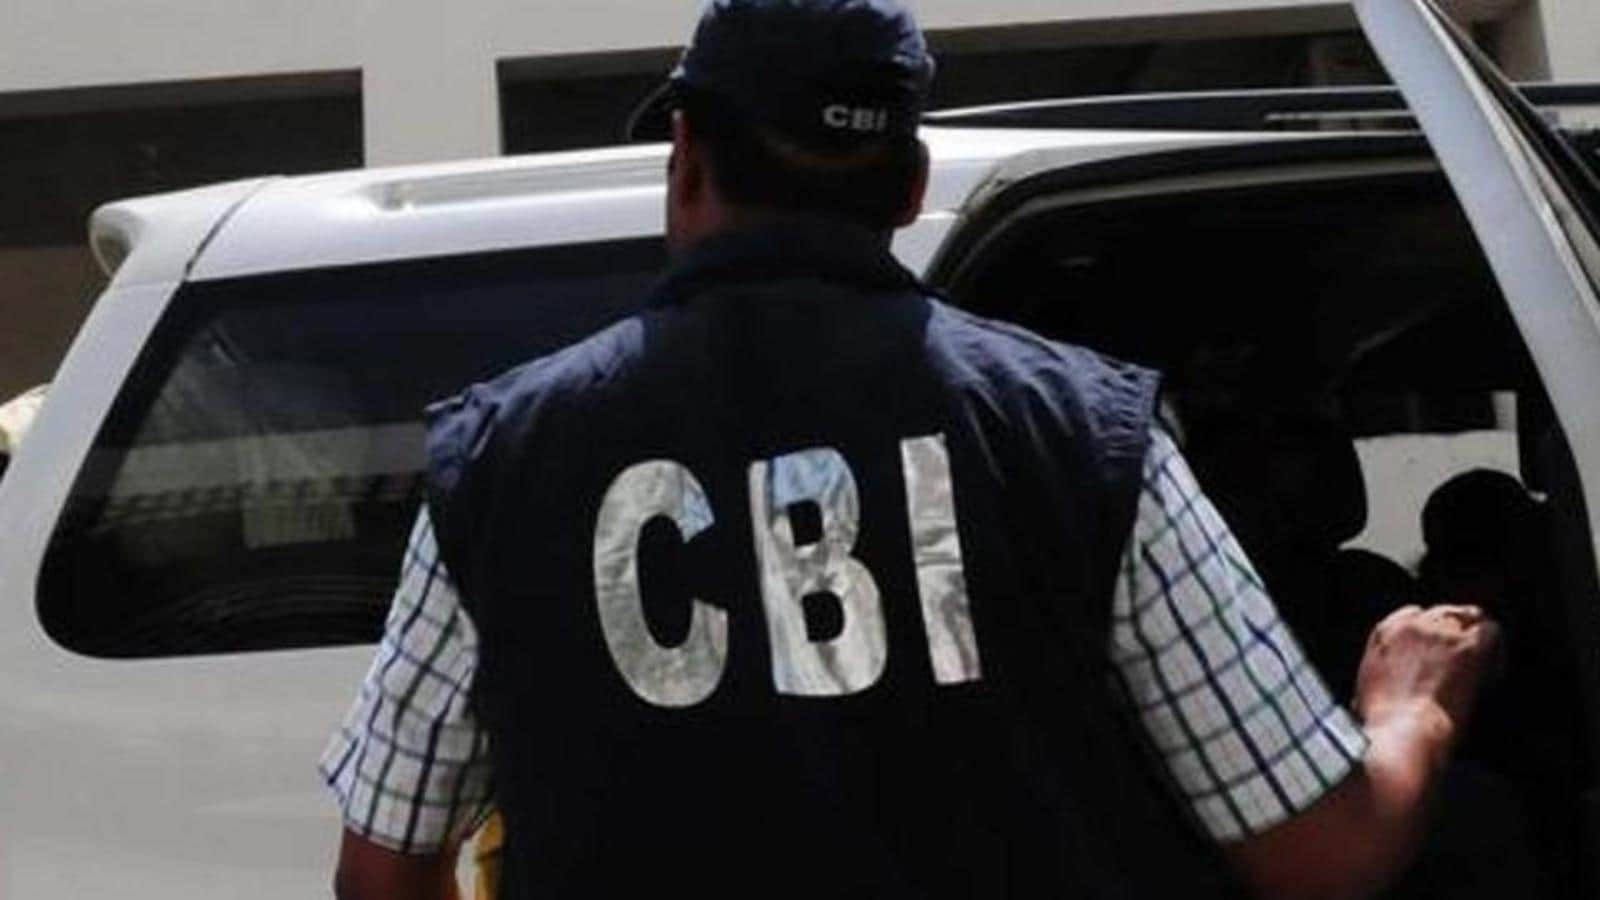 CBI conducts 76 raids for online child porn. One didn't go according to script | Latest News India - Hindustan Times